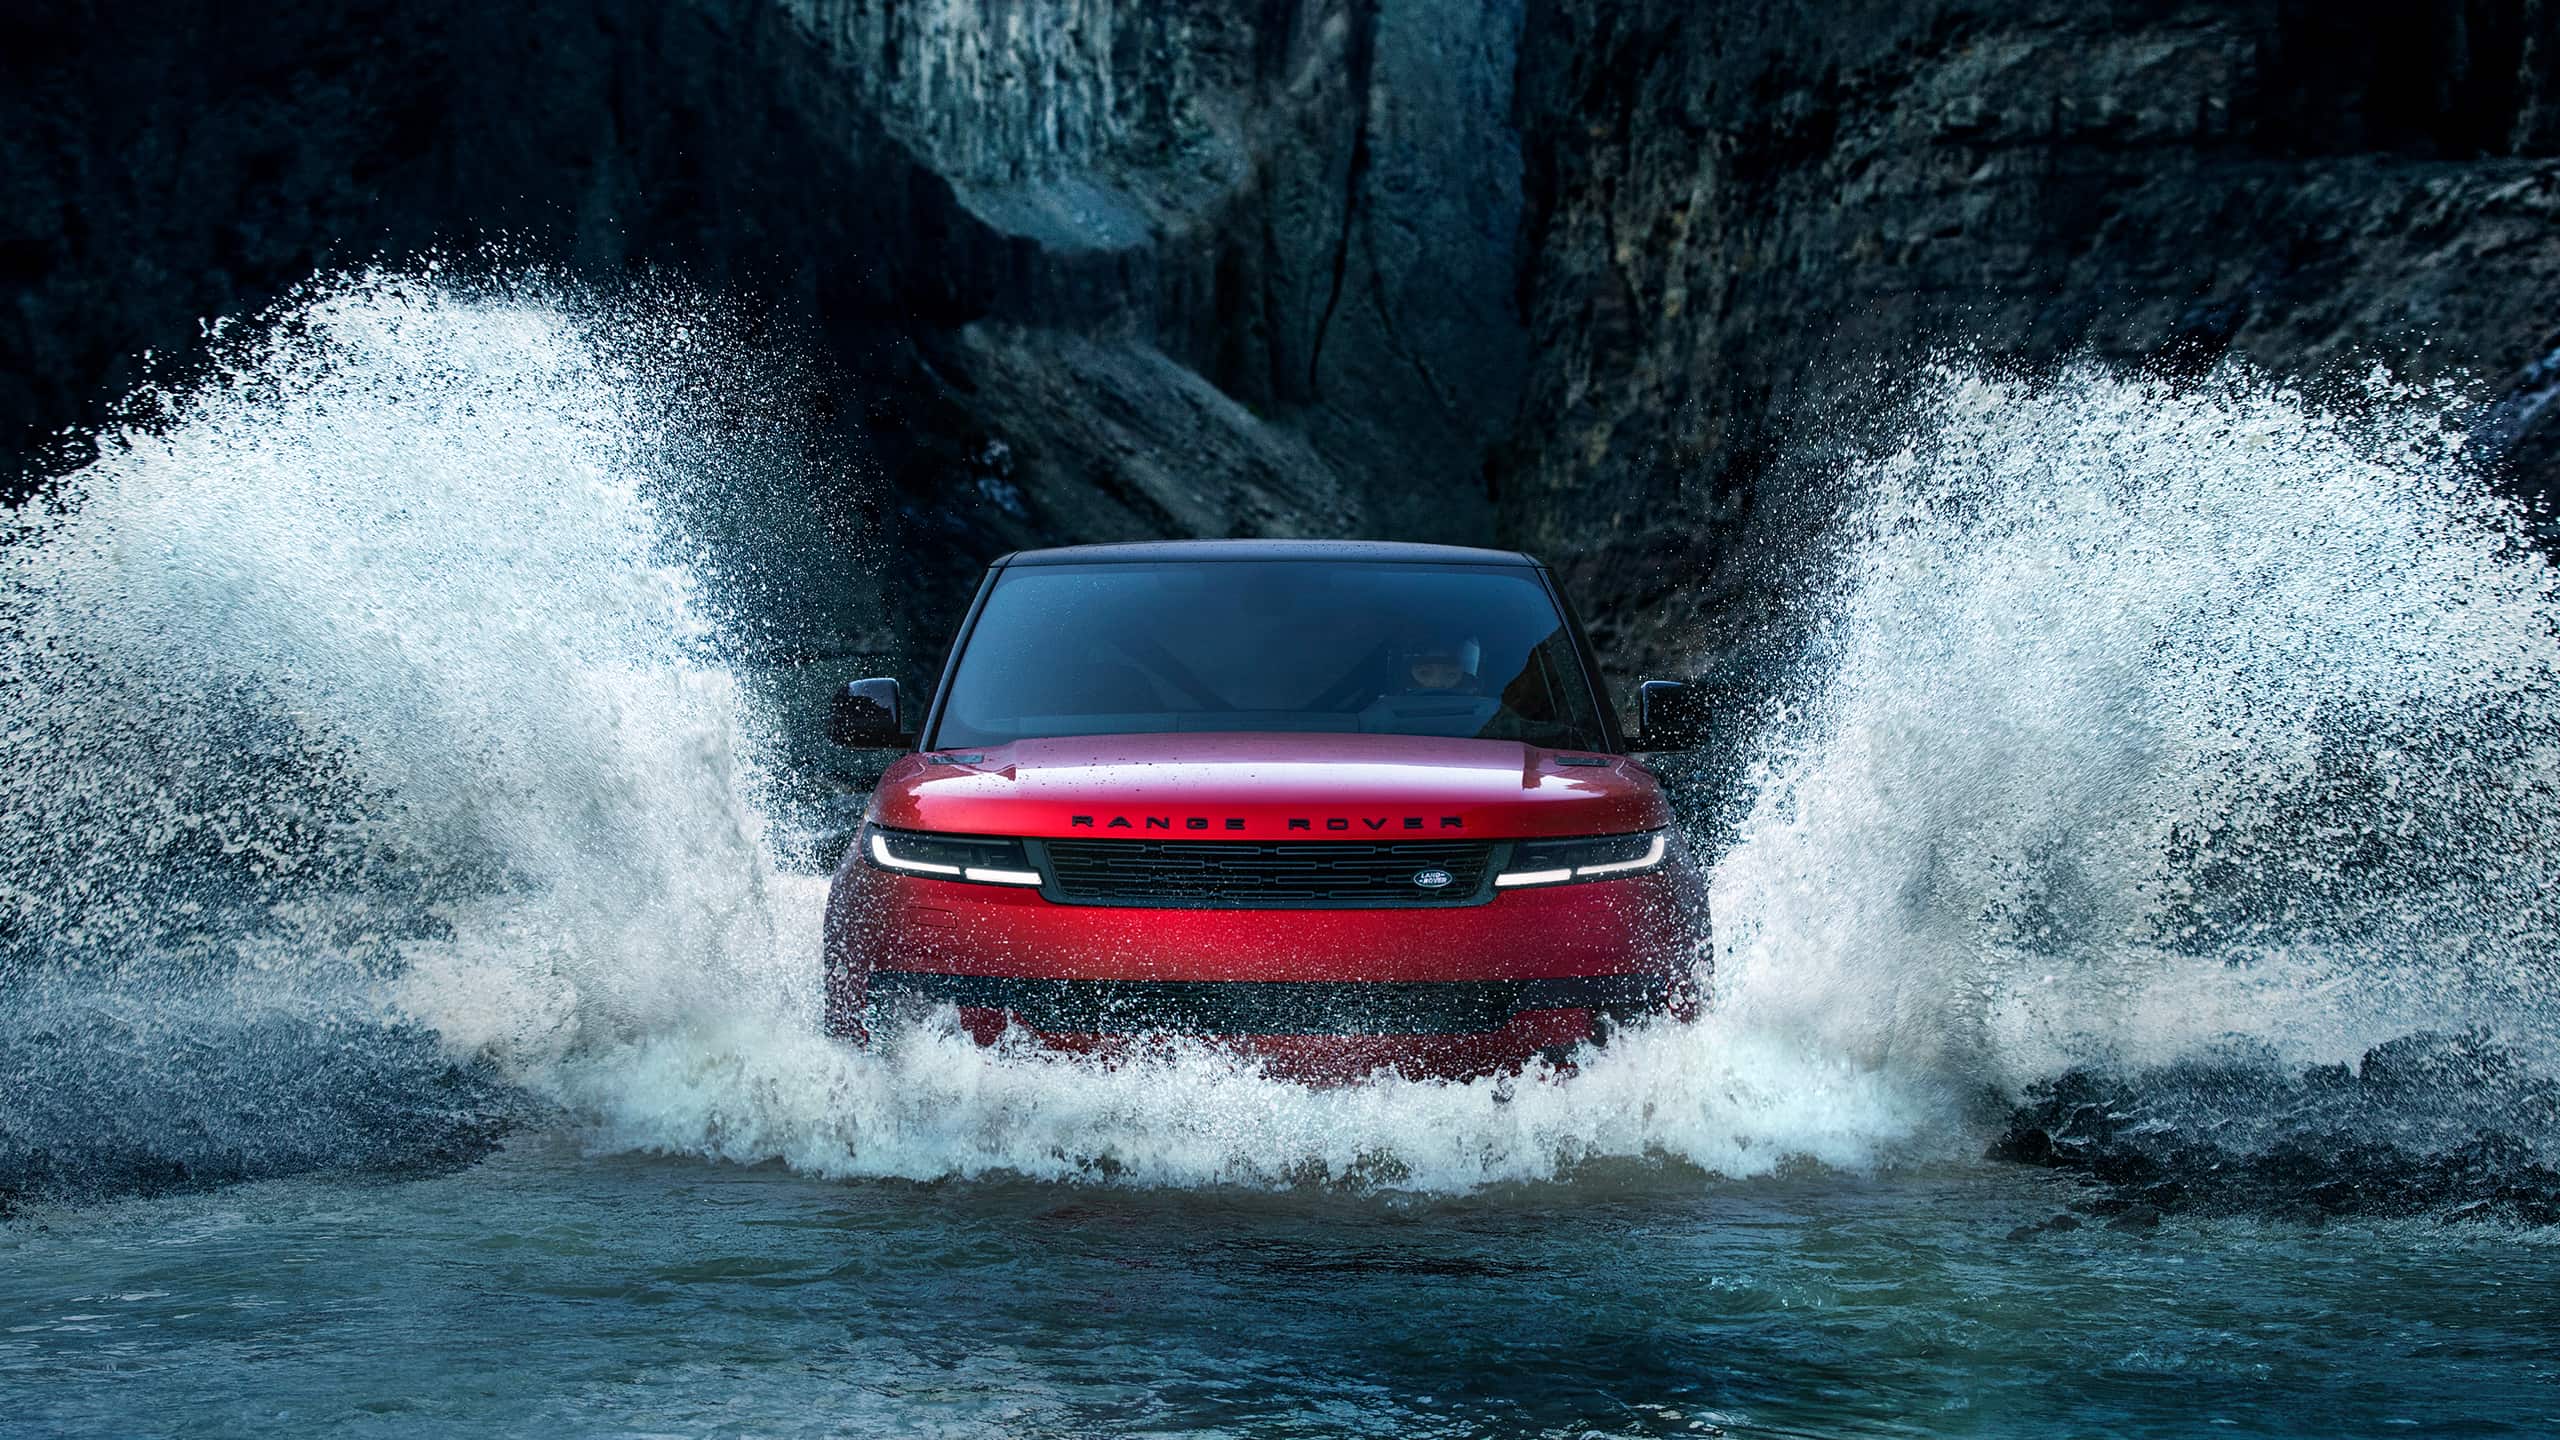 Range Rover Sport in the water